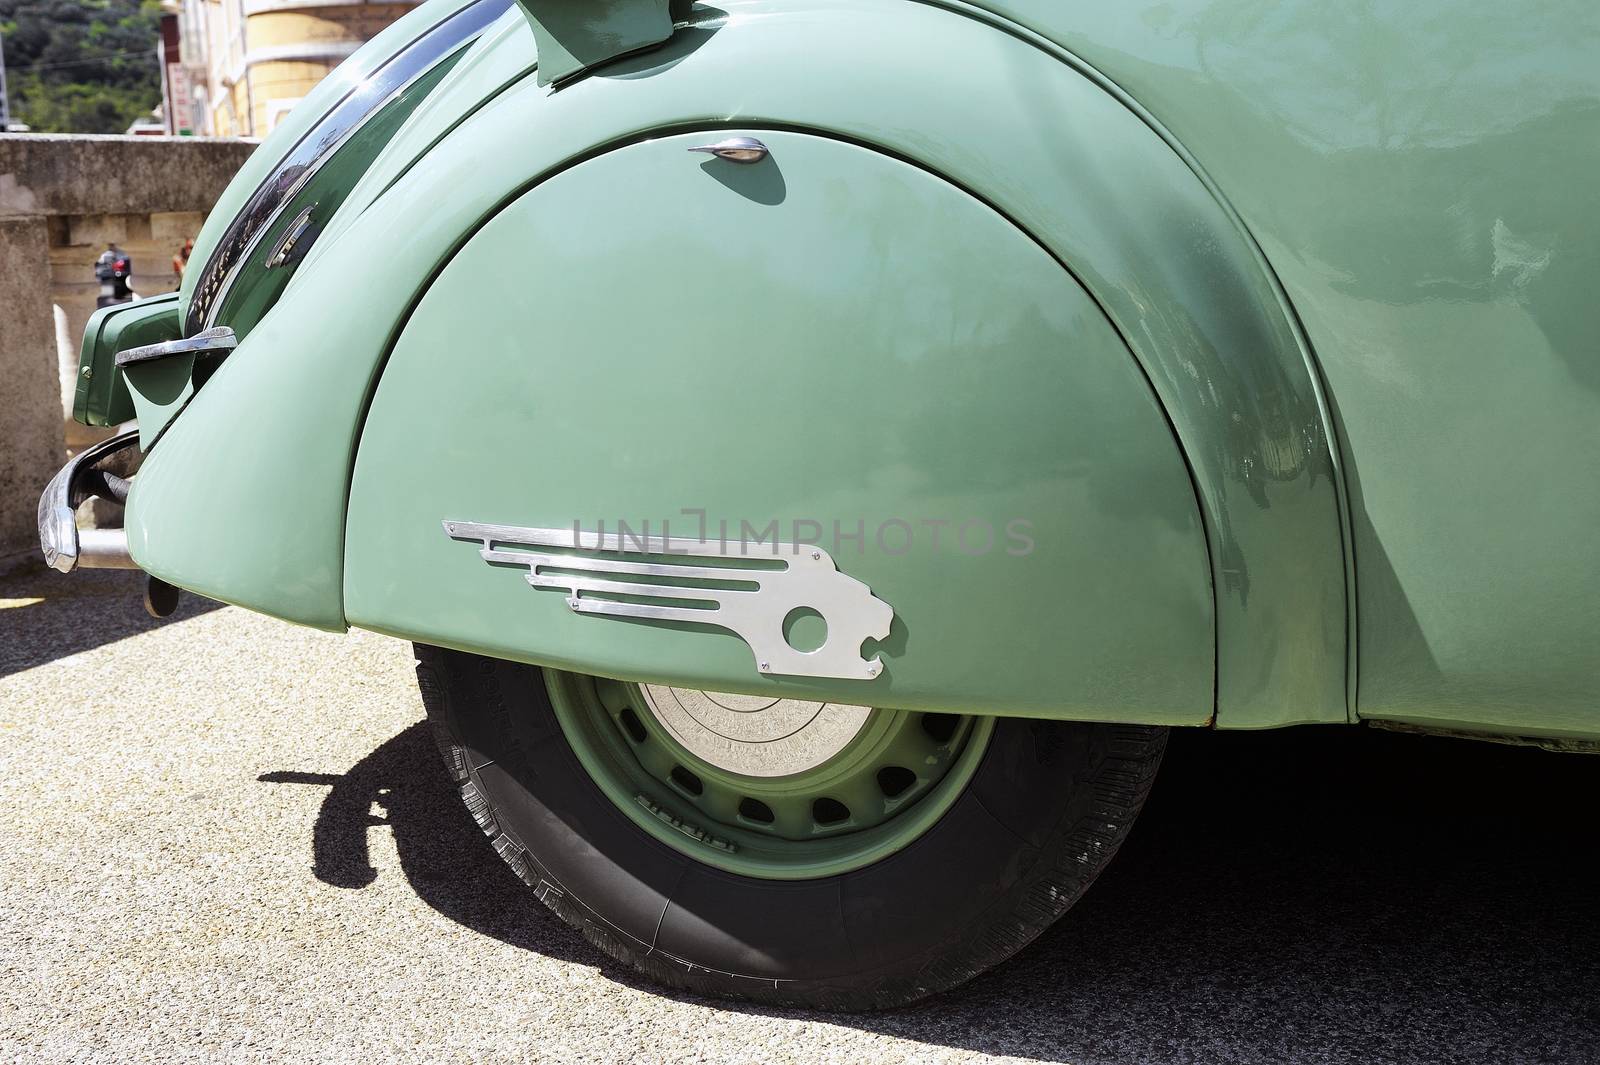 Peugeot 302 manufactured from 1936 to 1938 by gillespaire